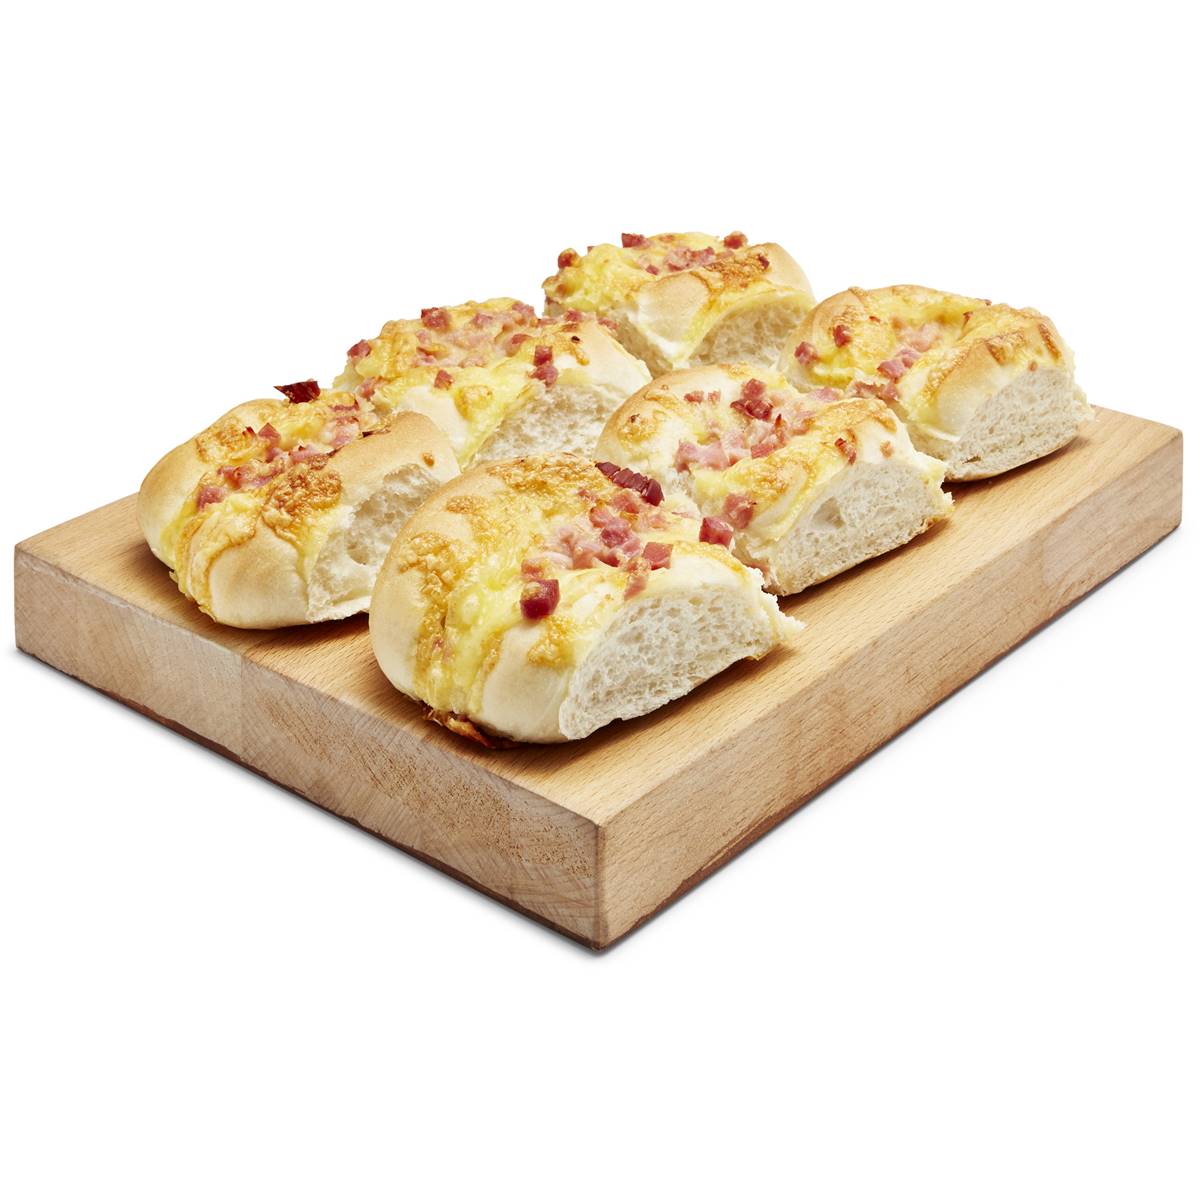 Calories in Woolworths Bread Rolls Bacon & Cheese